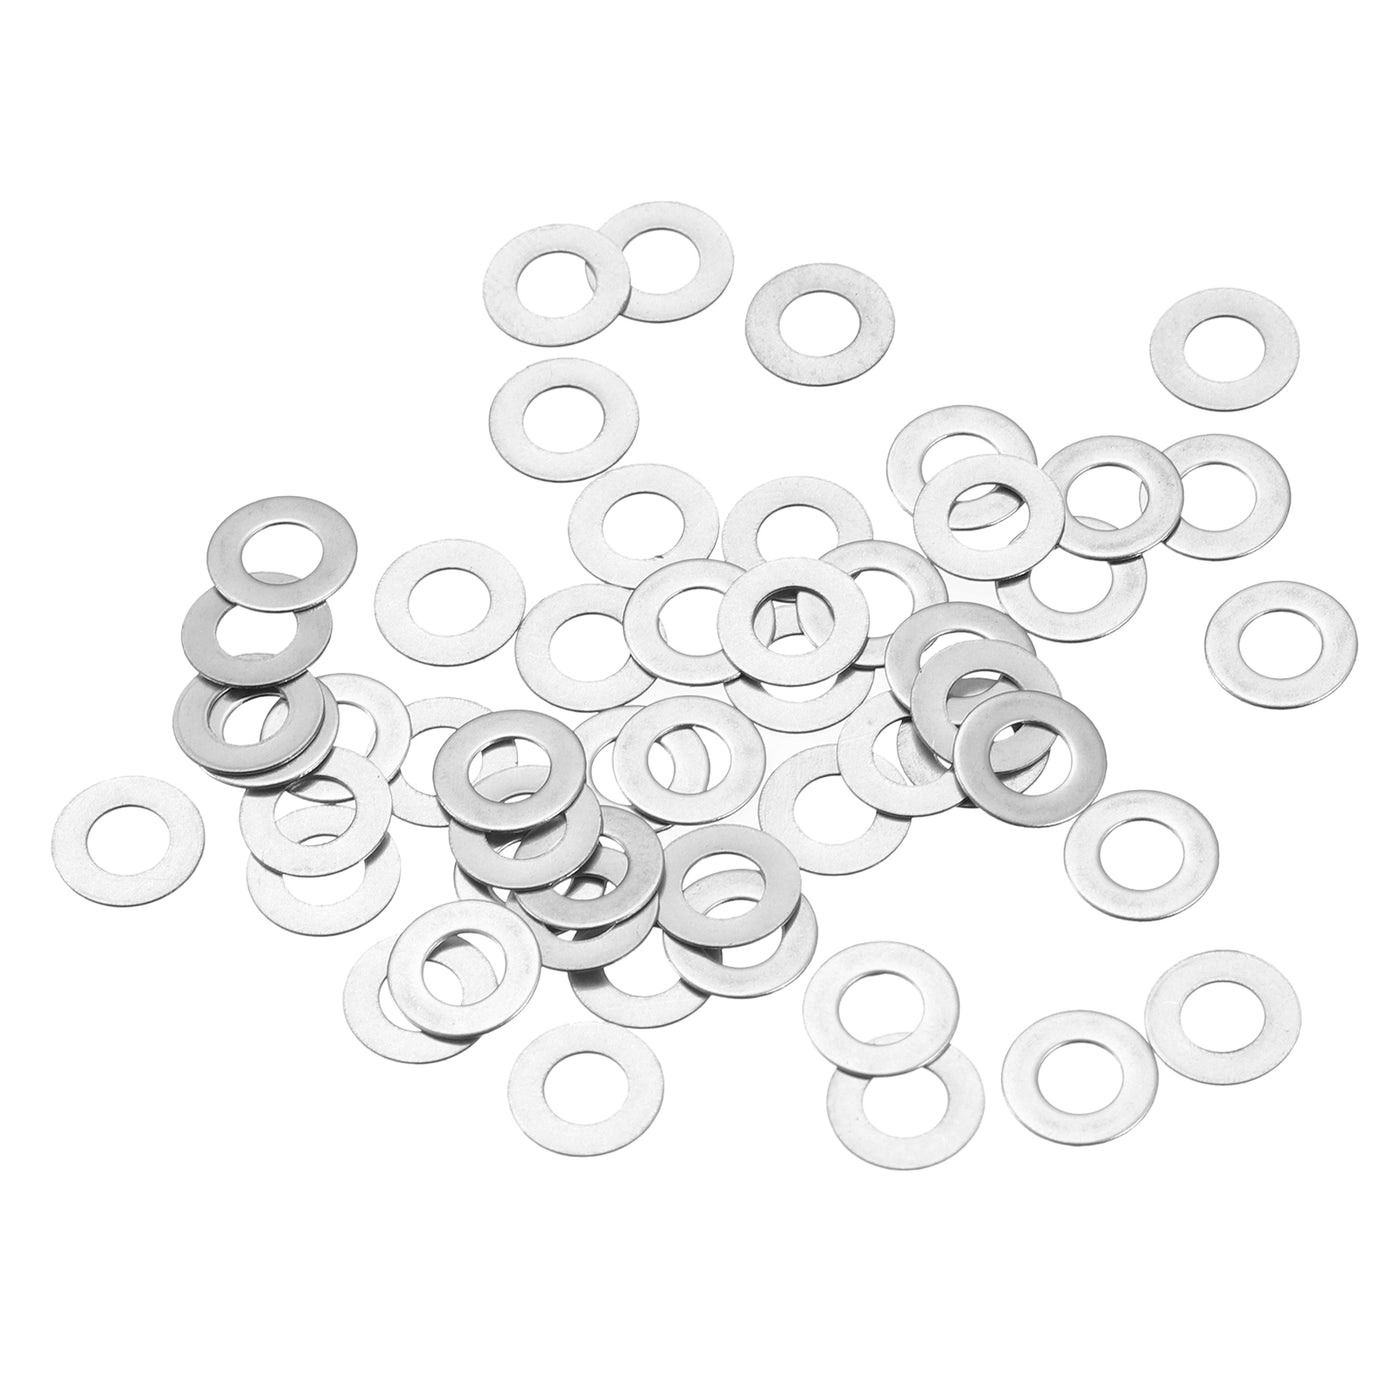 uxcell Uxcell M4 304 Stainless Steel Flat Washers, 50pcs 4x8x0.3mm Ultra Thin Flat Spacers